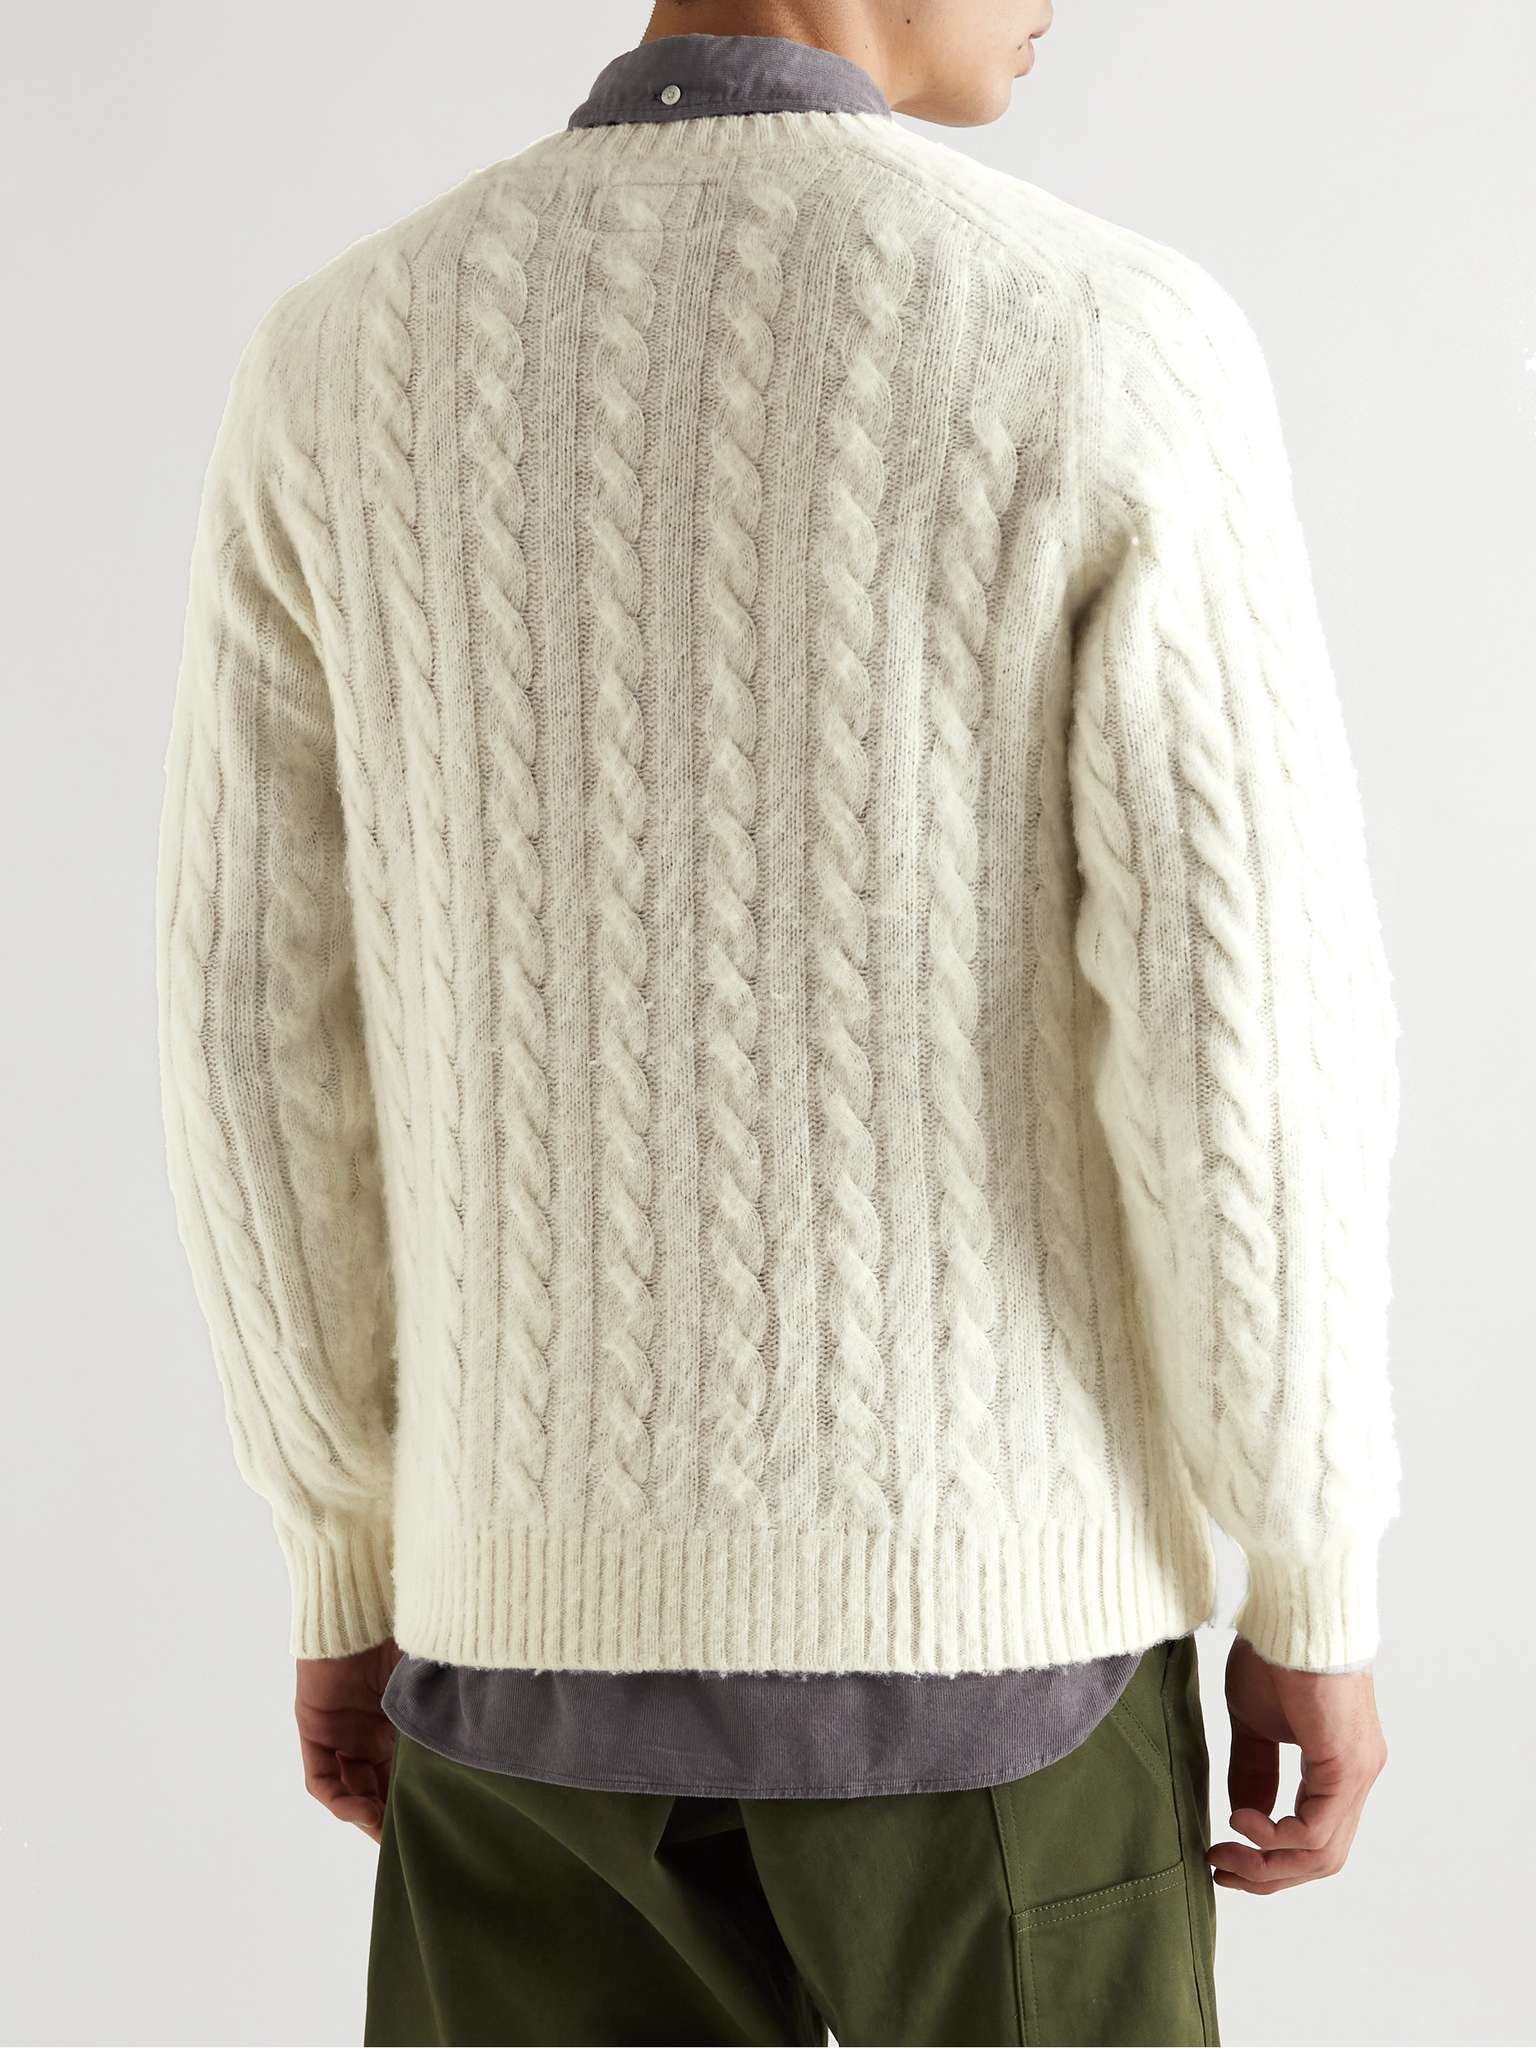 Off-white Cable-Knit Wool-Blend Sweater | BEAMS PLUS | MR PORTER